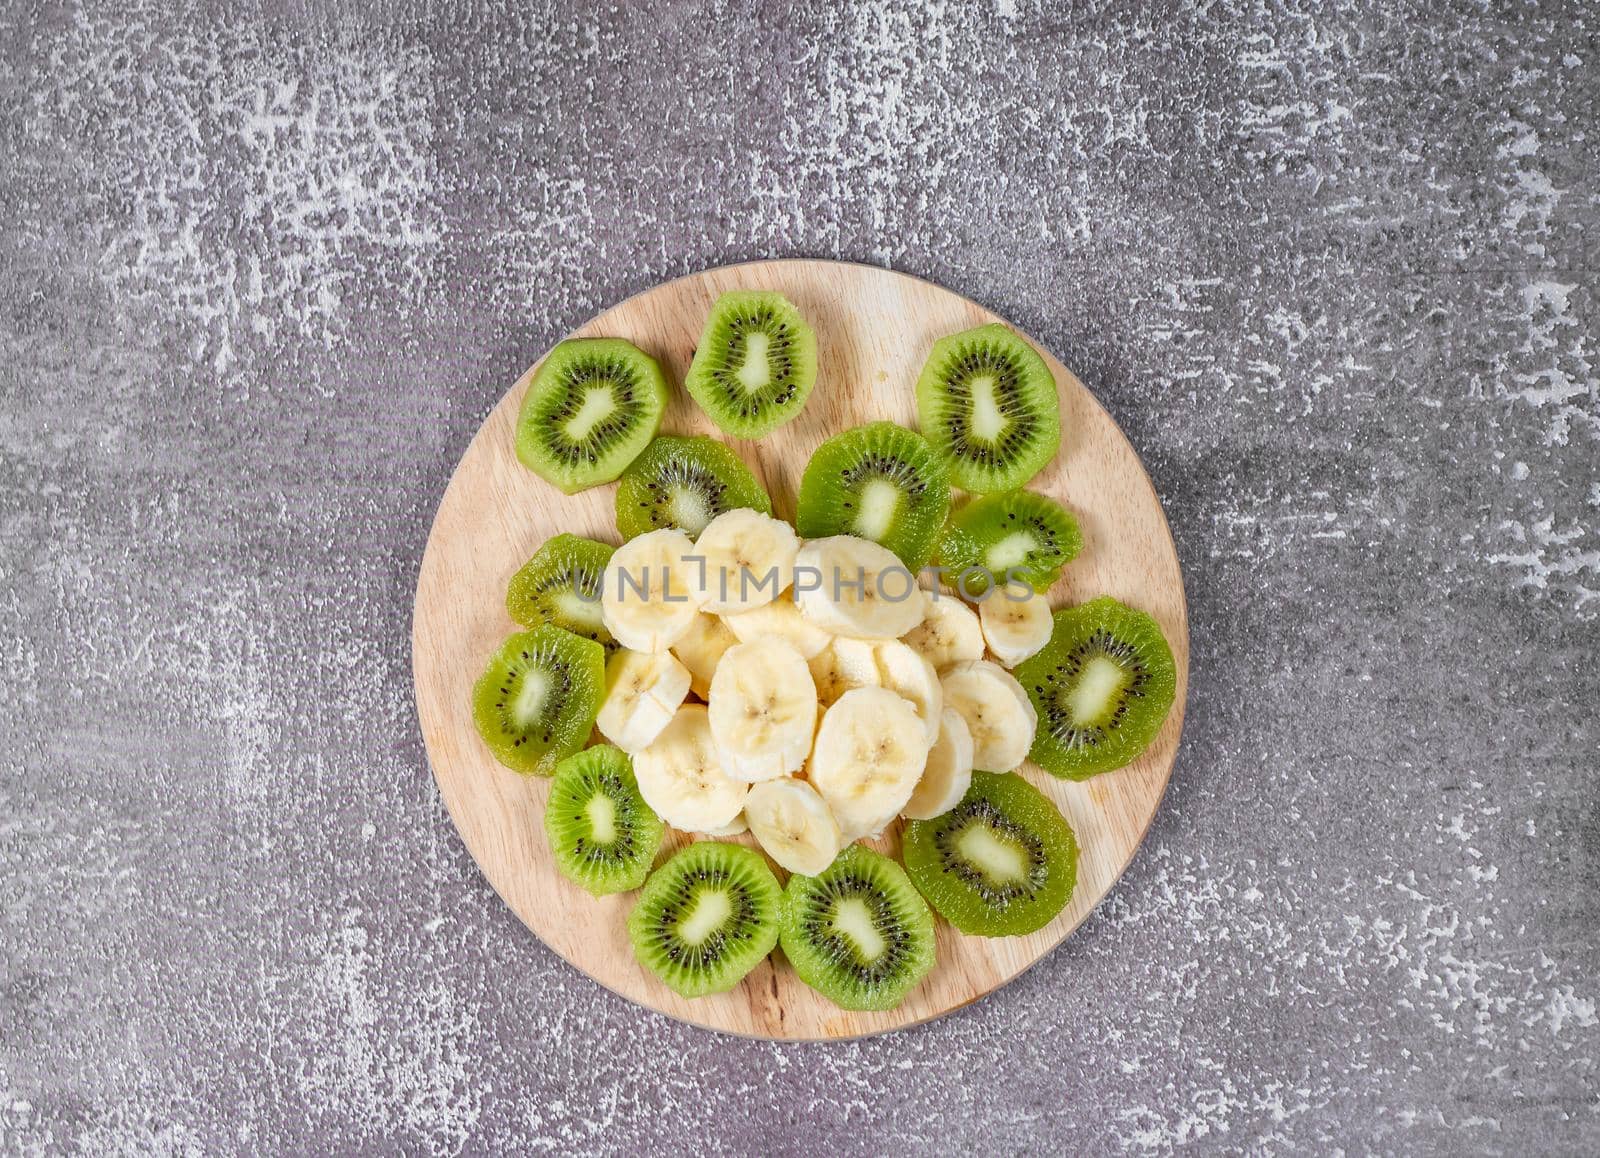 Step 4. Slicing fruit for smoothies. Peeled banana and kiwi are cut on a cutting board.